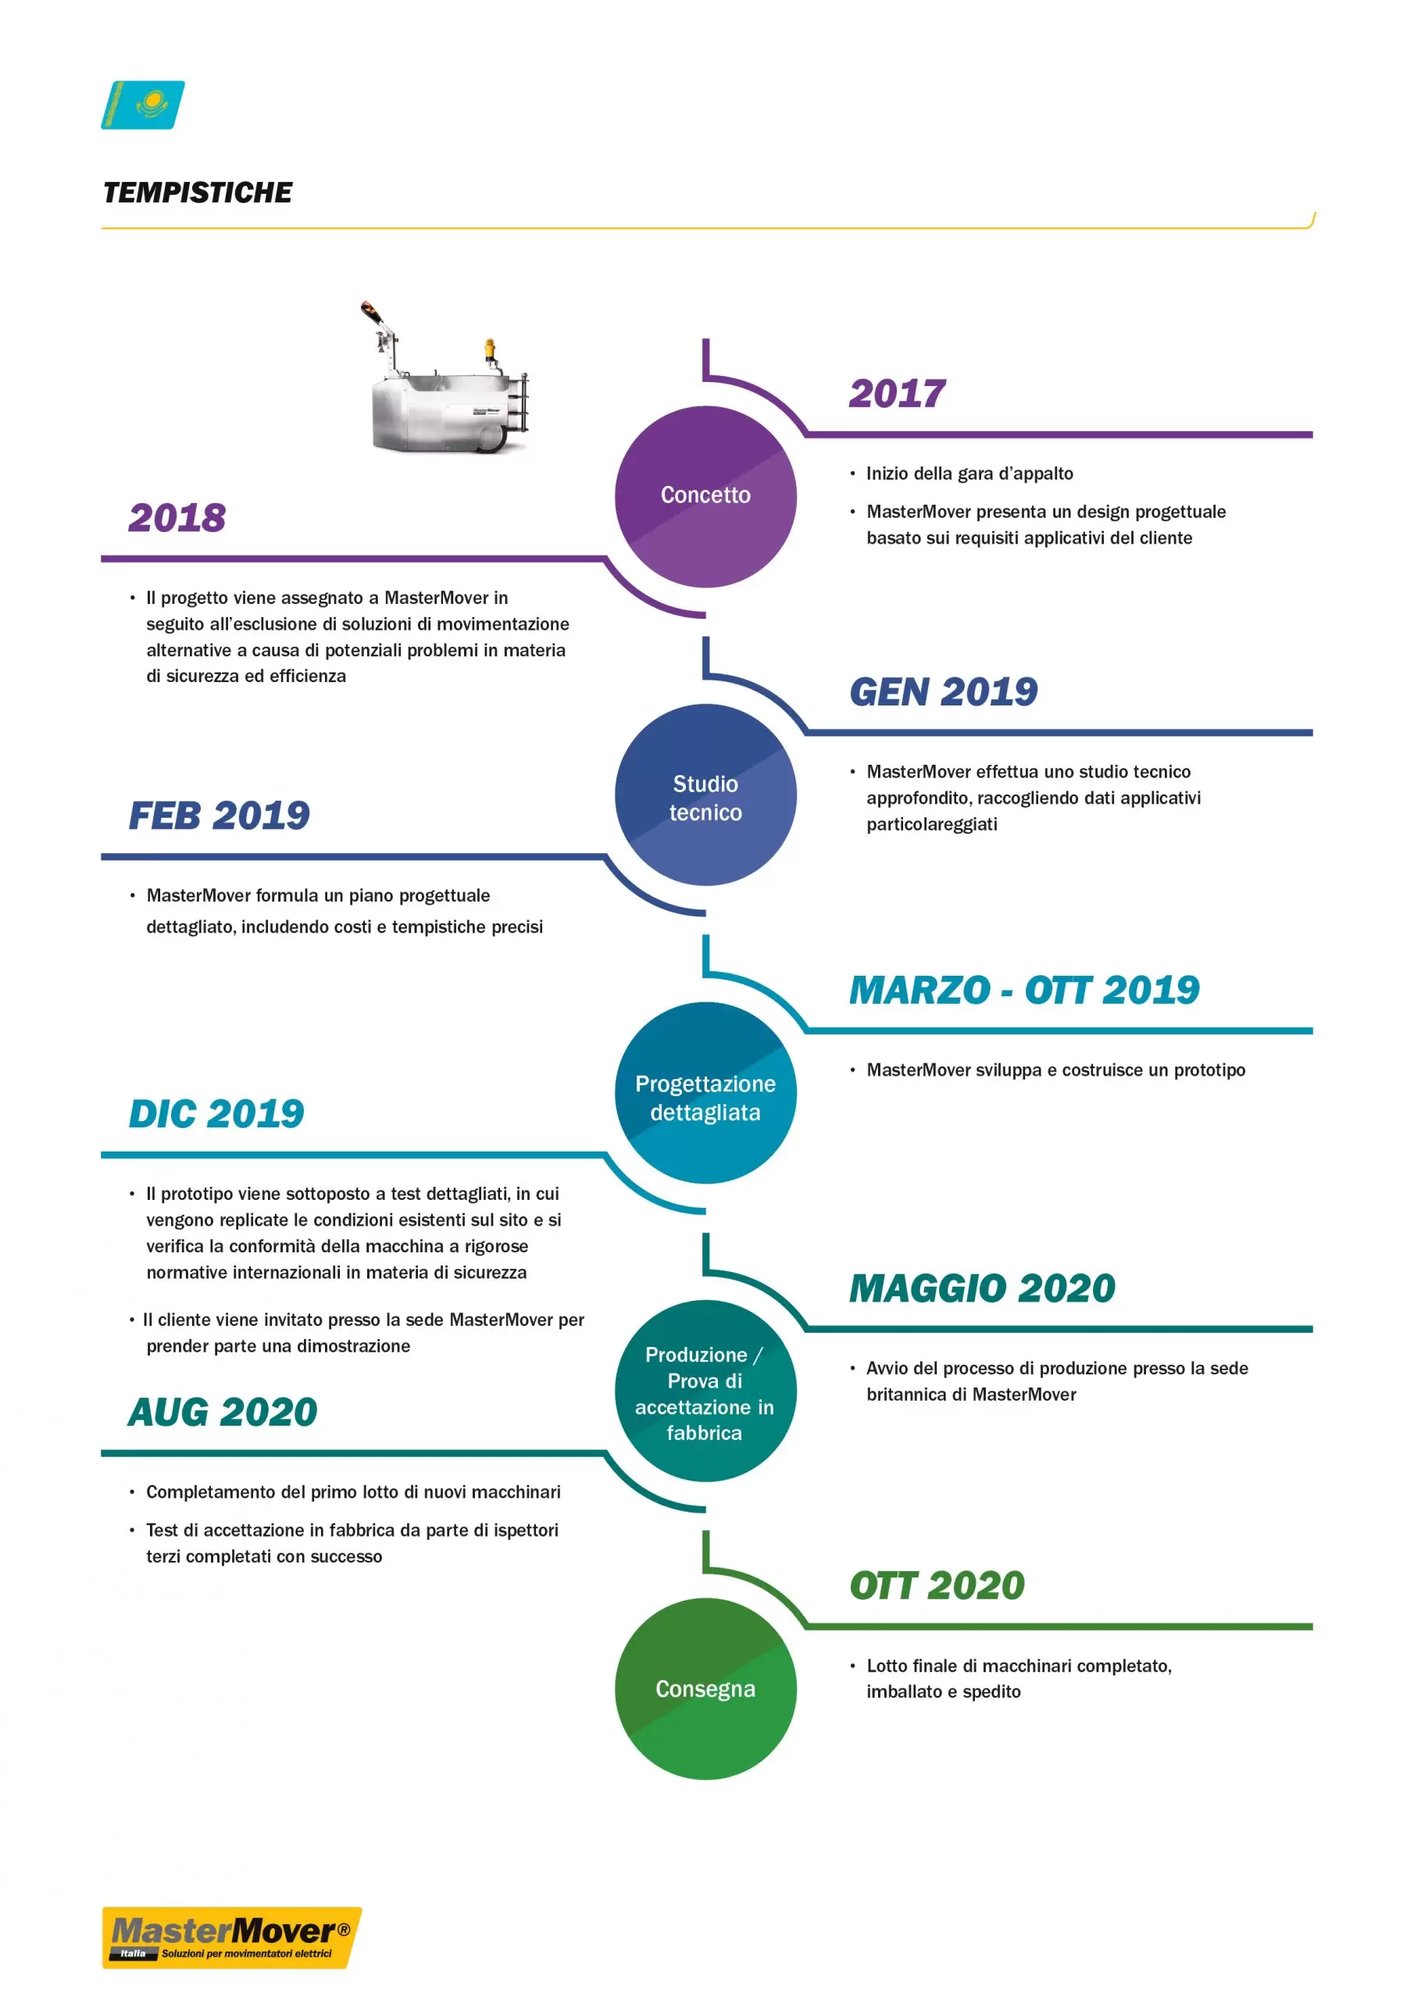 MM-Moving-Stories-ITA-Case-Study-Timeline-scaled.jpg